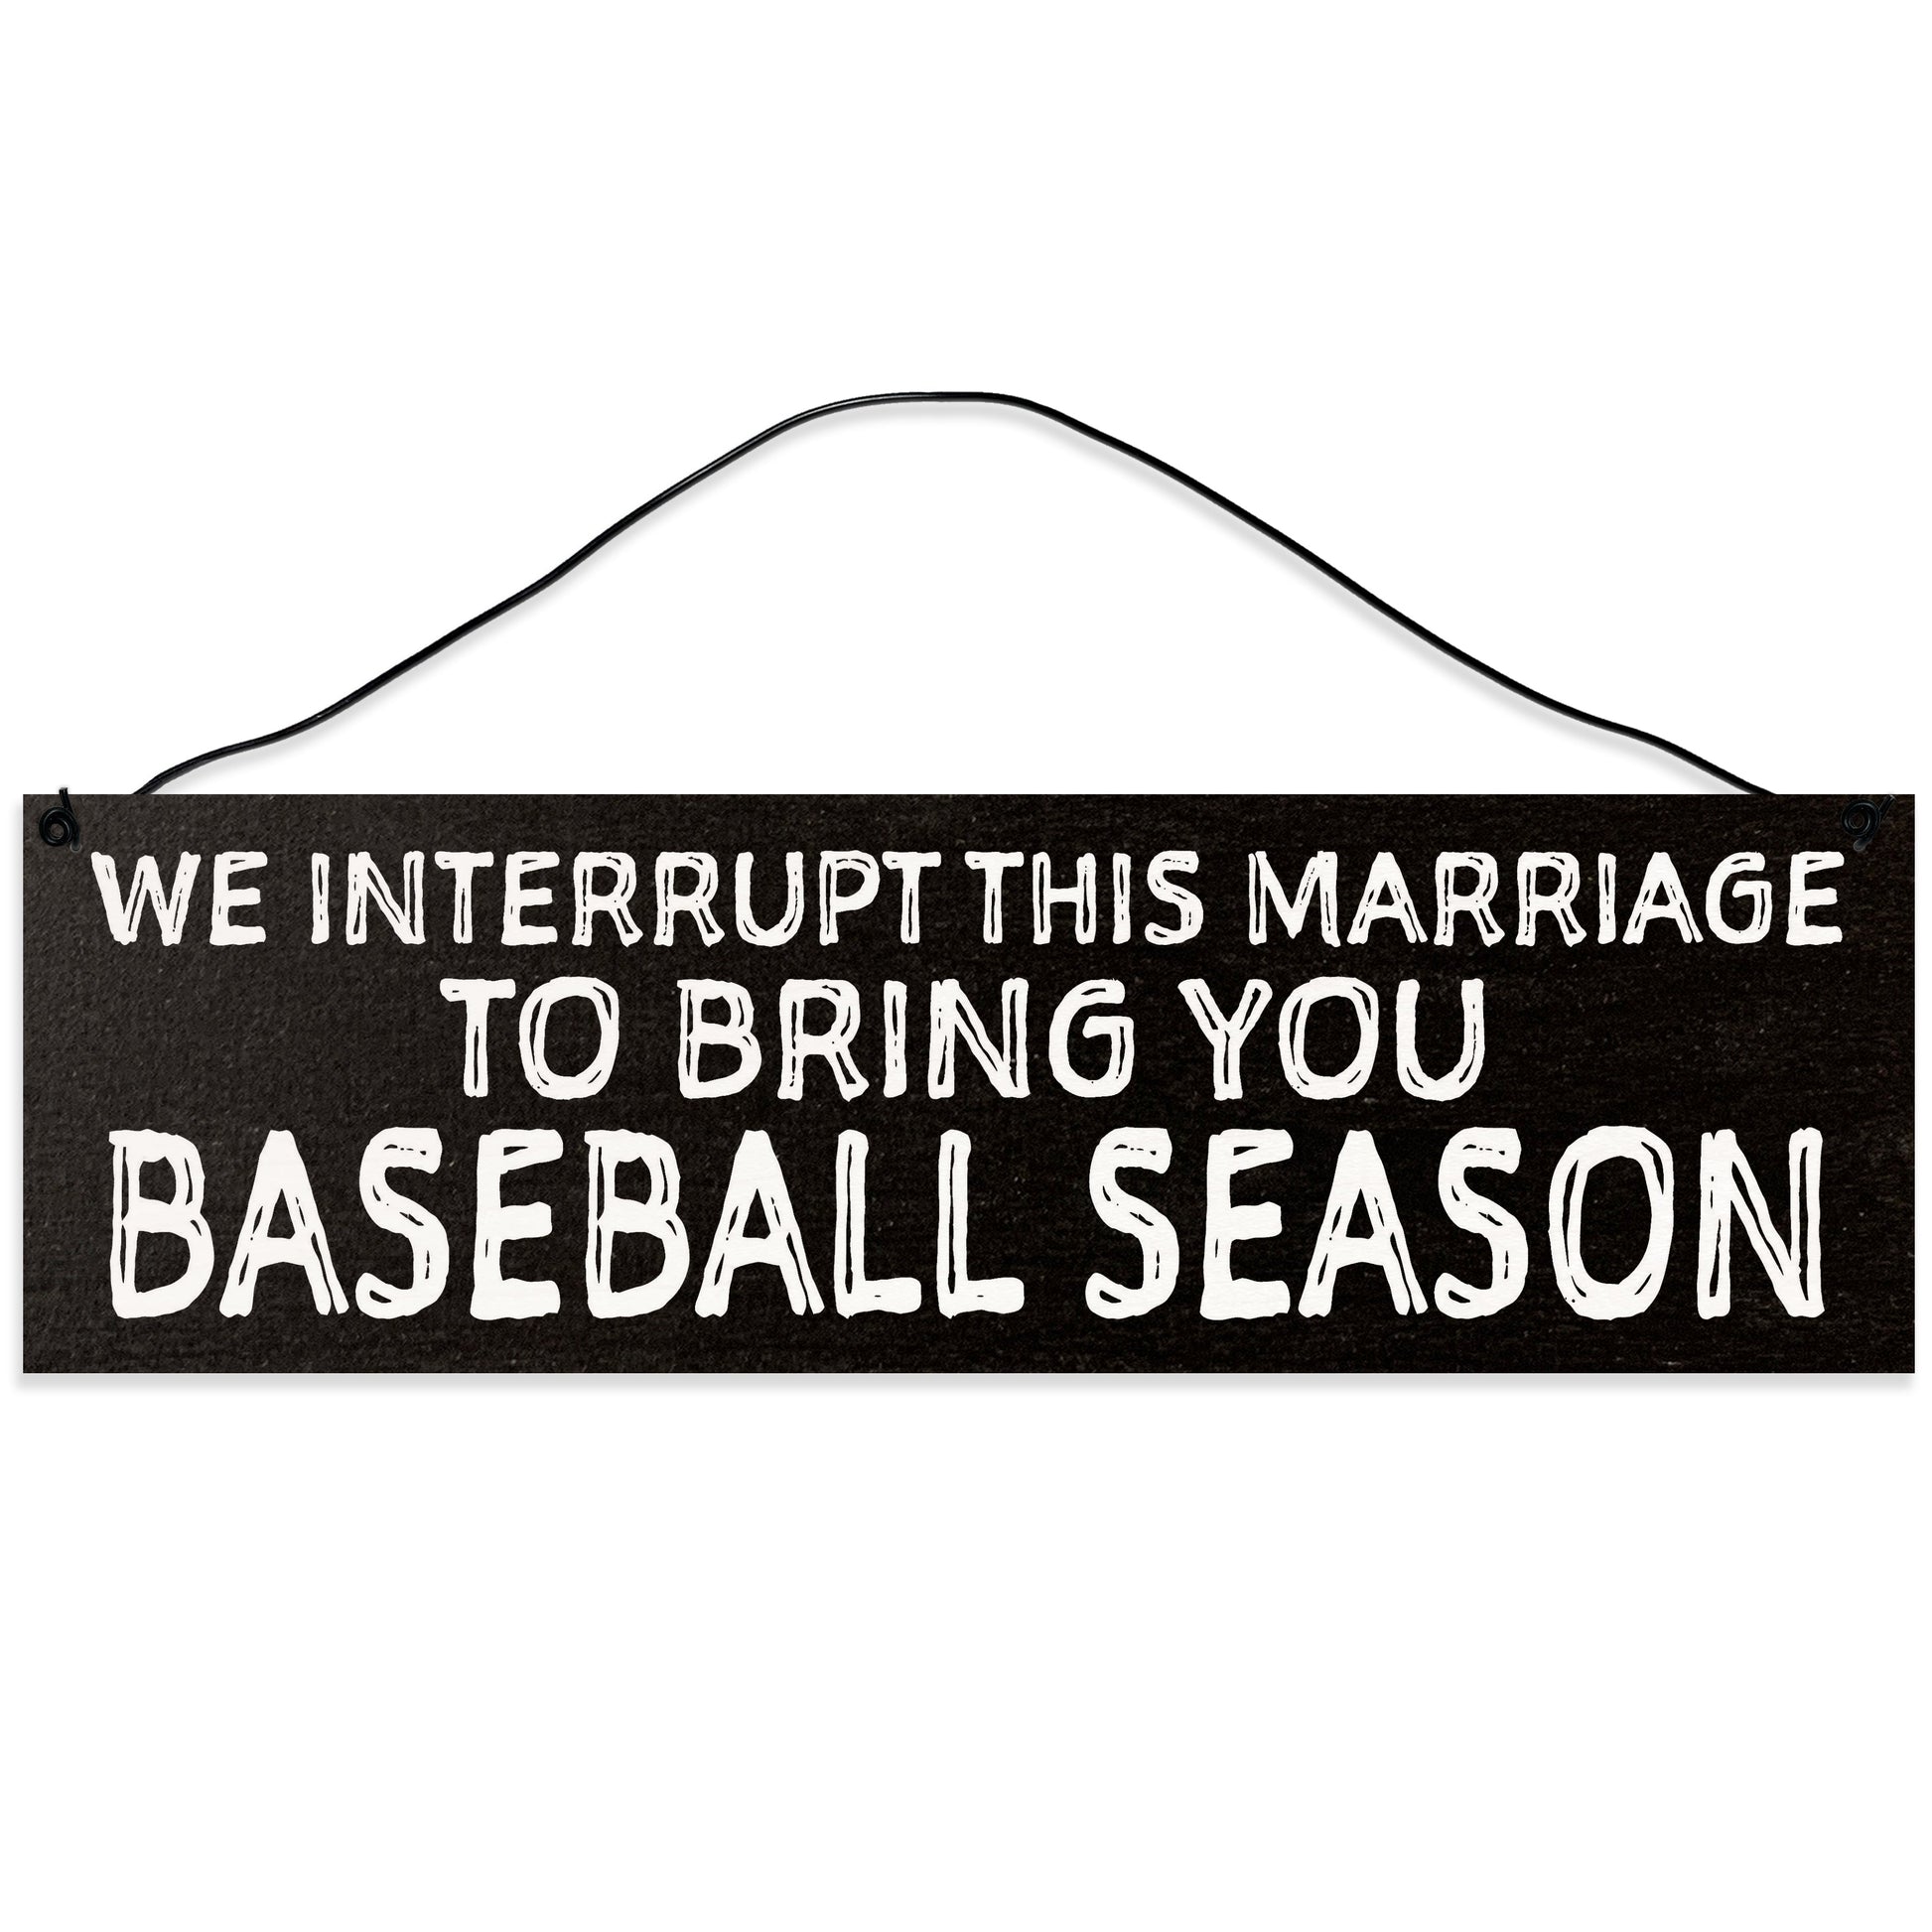 Sawyer's Mill - We Interrupt This Marriage to Bring You Baseball Season. Wood Sign for Home or Office. Measures 3x10 inches.